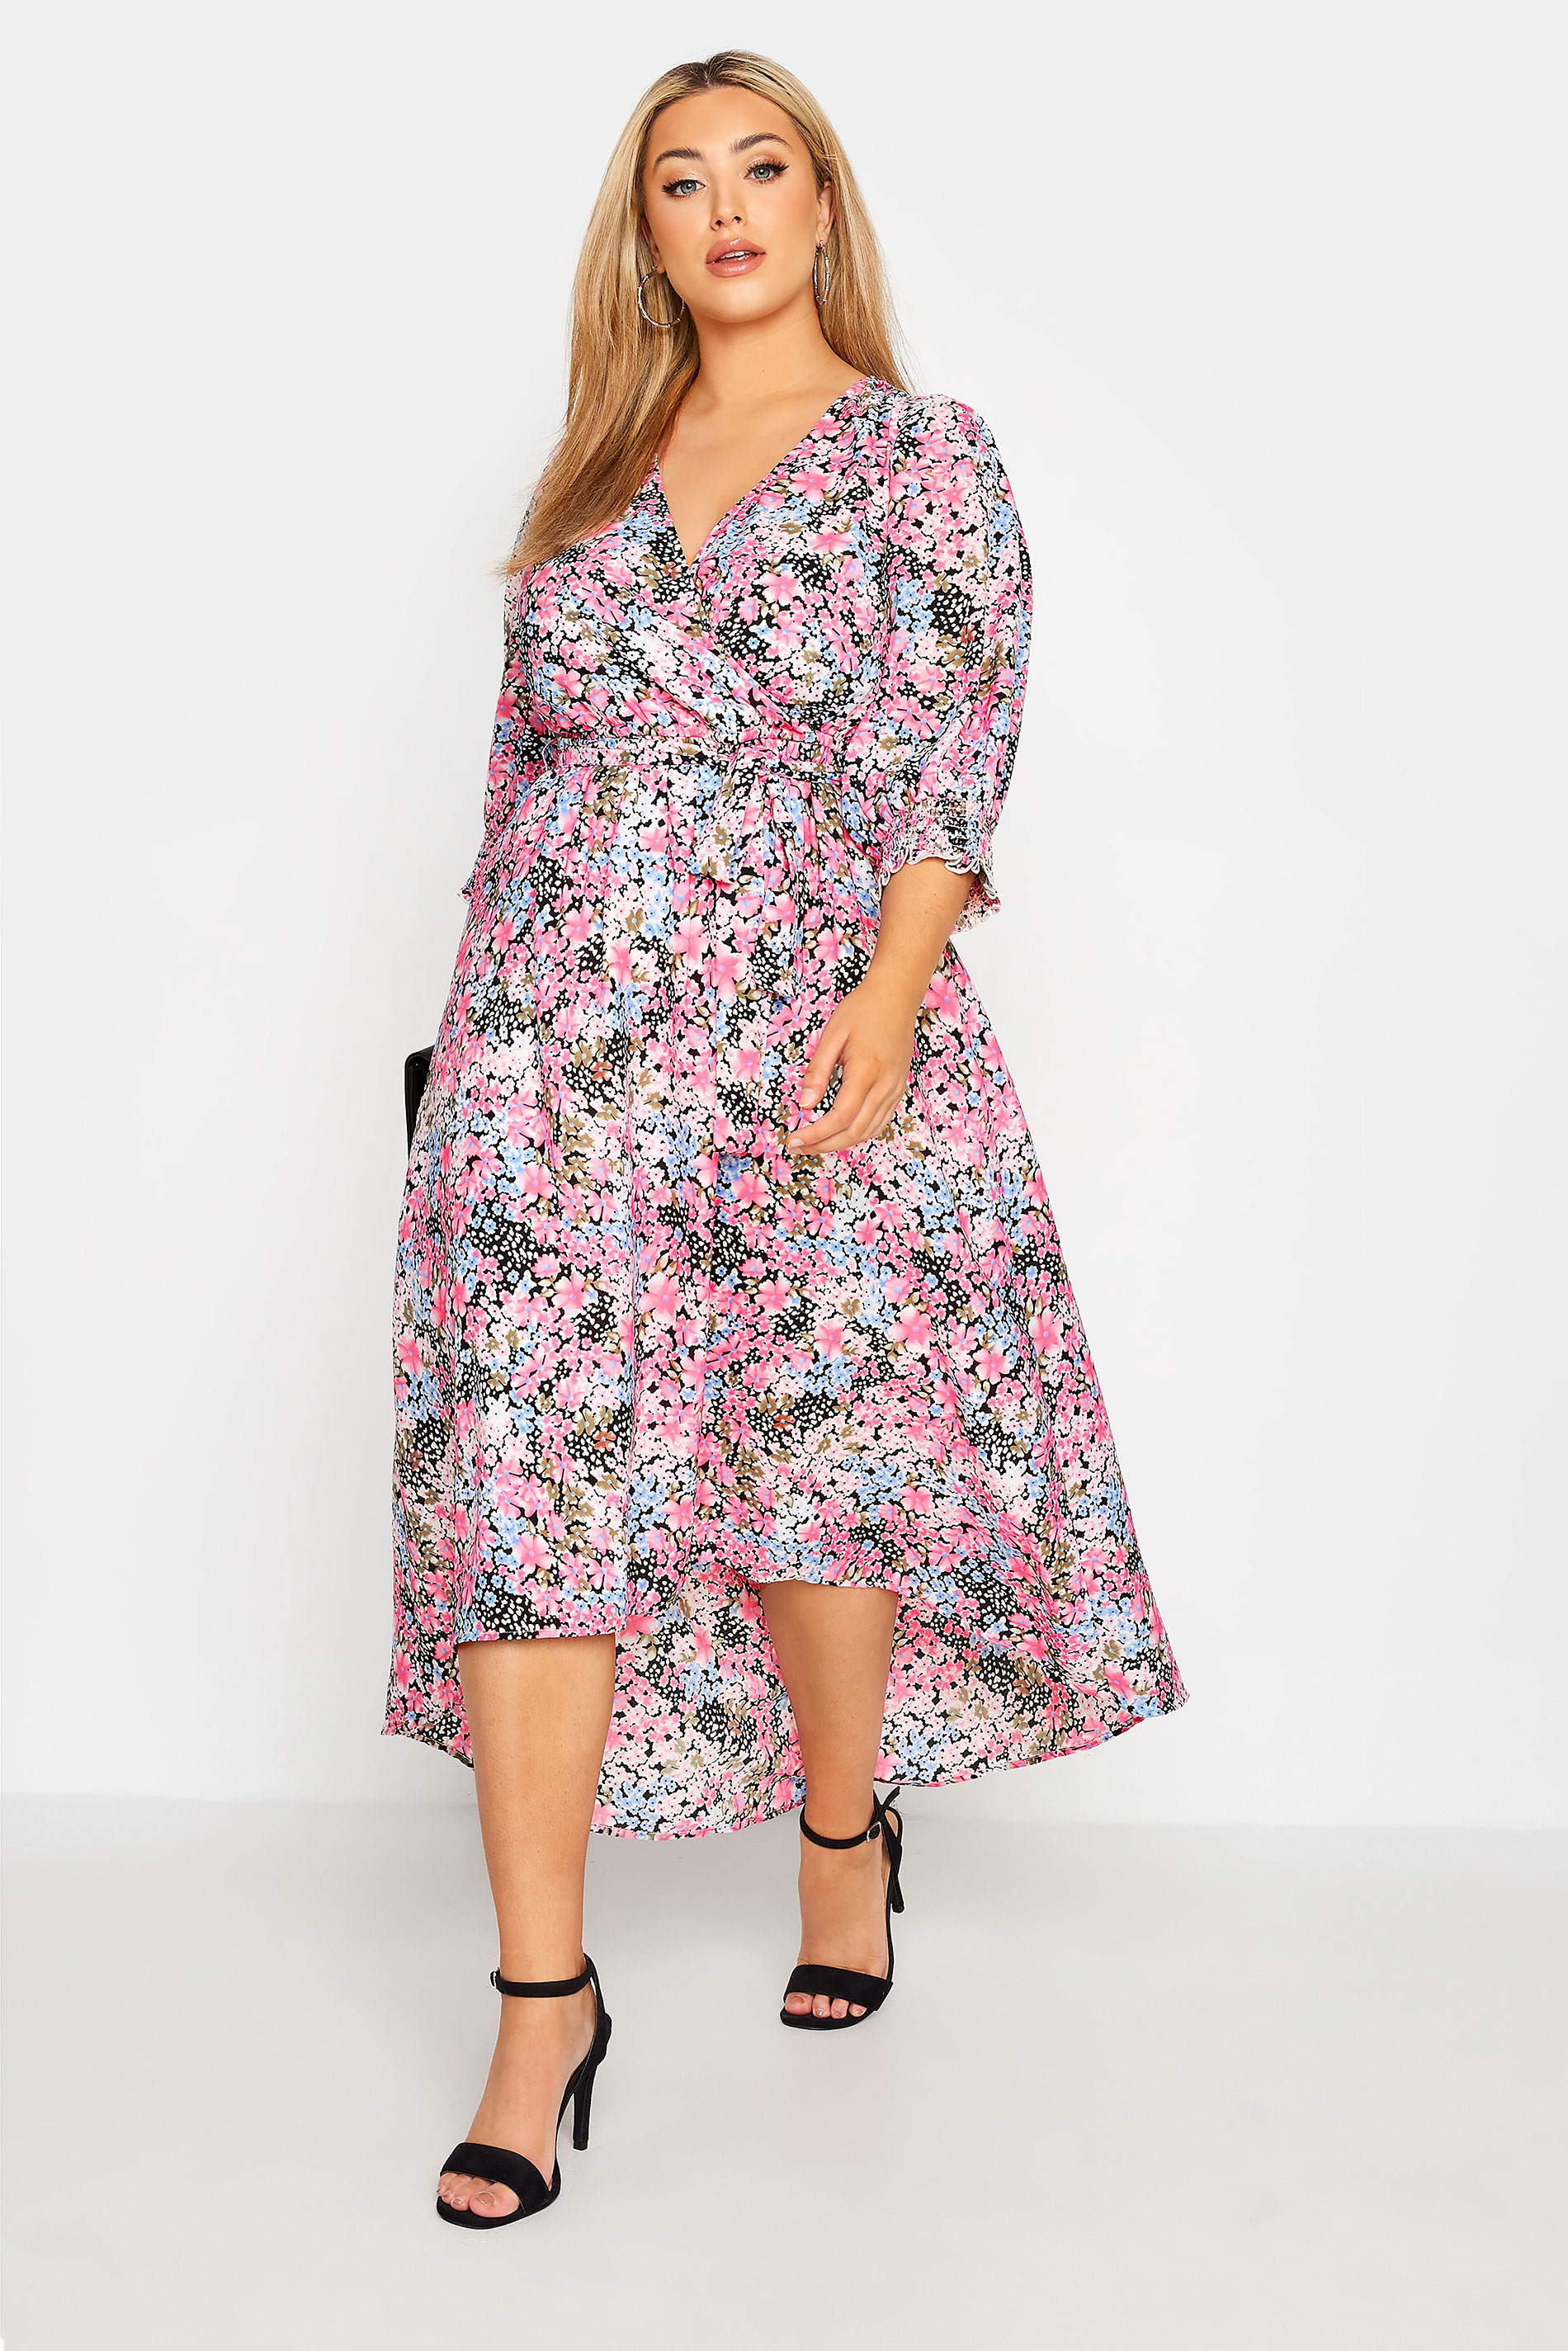 Robes Grande Taille Grande taille  Robes Portefeuilles | YOURS LONDON - Robe Rose Clair Floral Ourlet Plongeant - GI17491